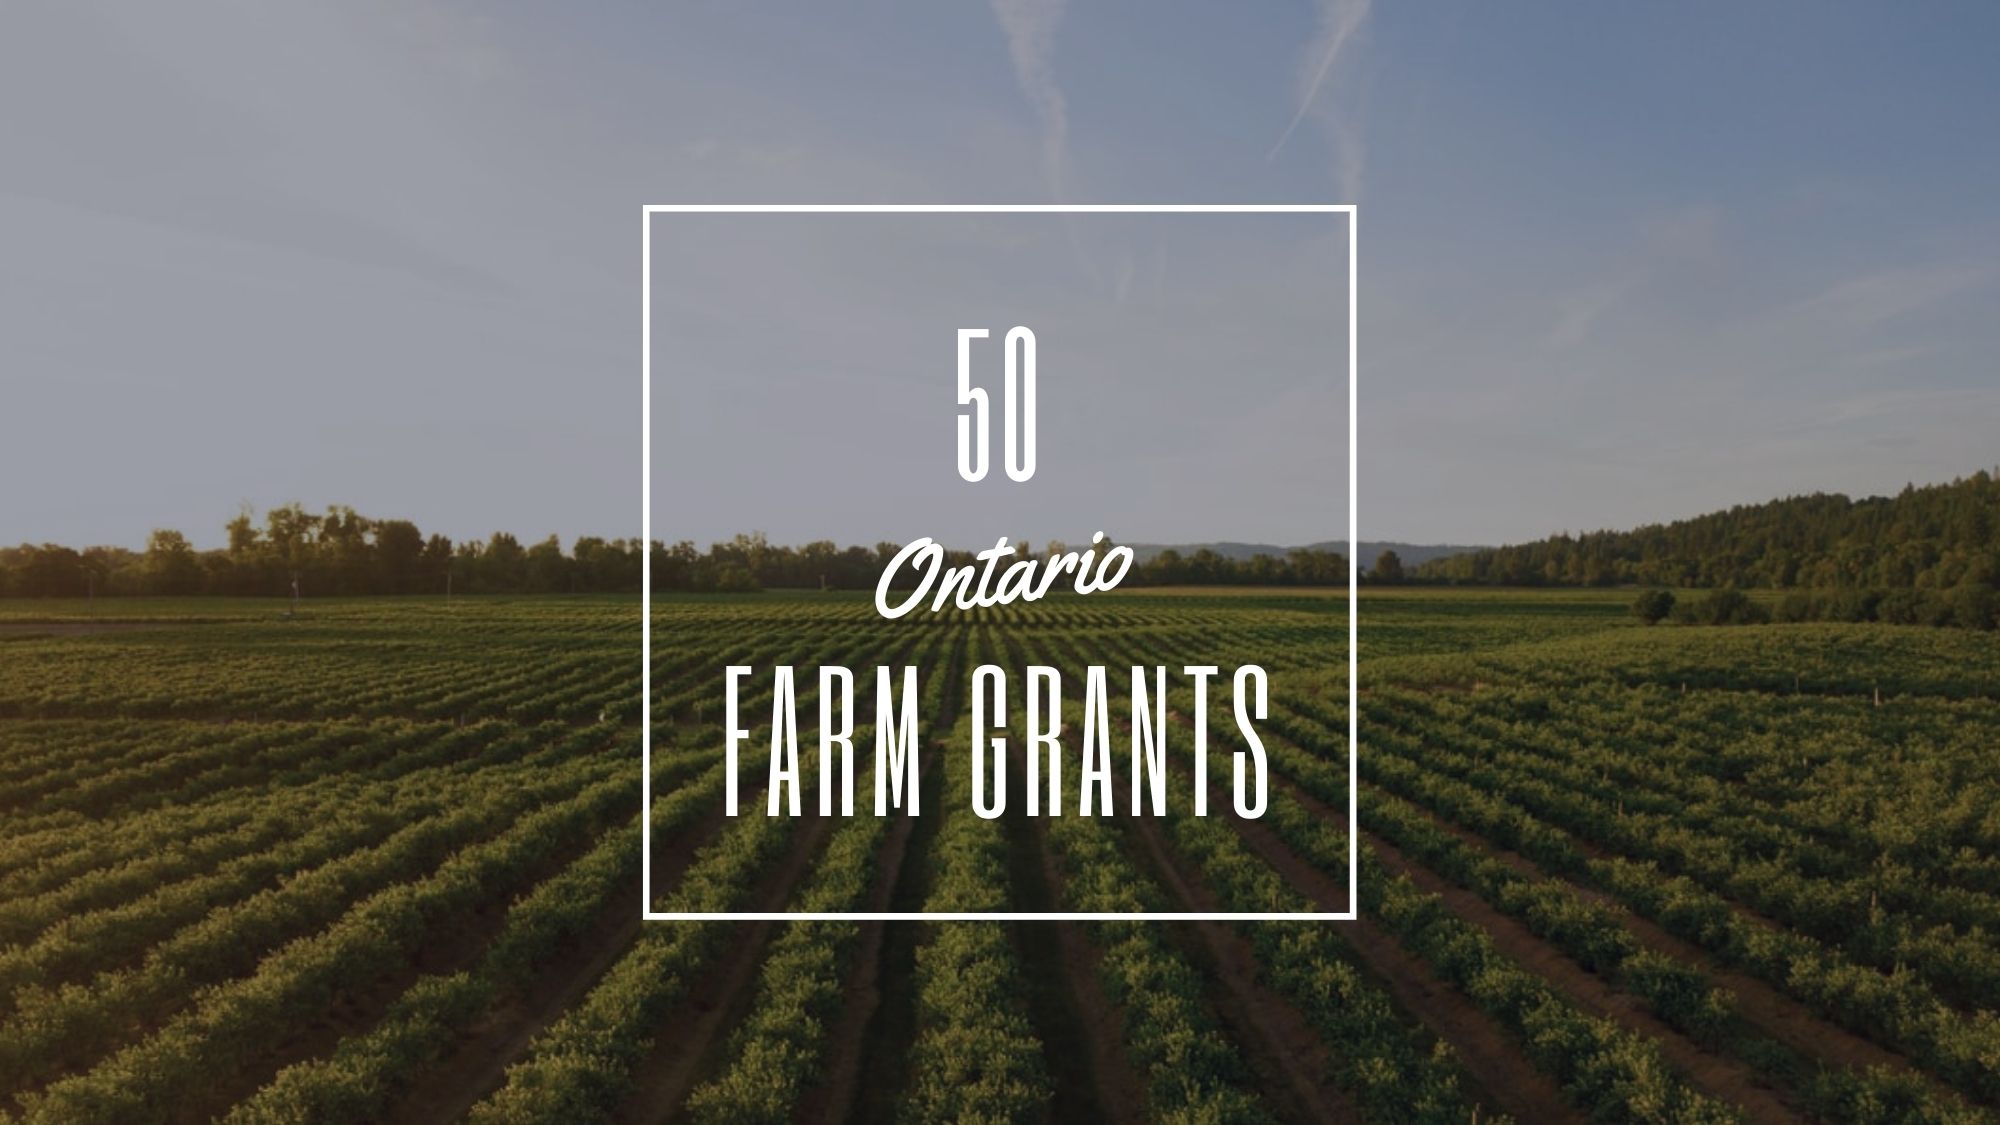 50 Ontario Farm Grants Canada Small Business Startups and Funding